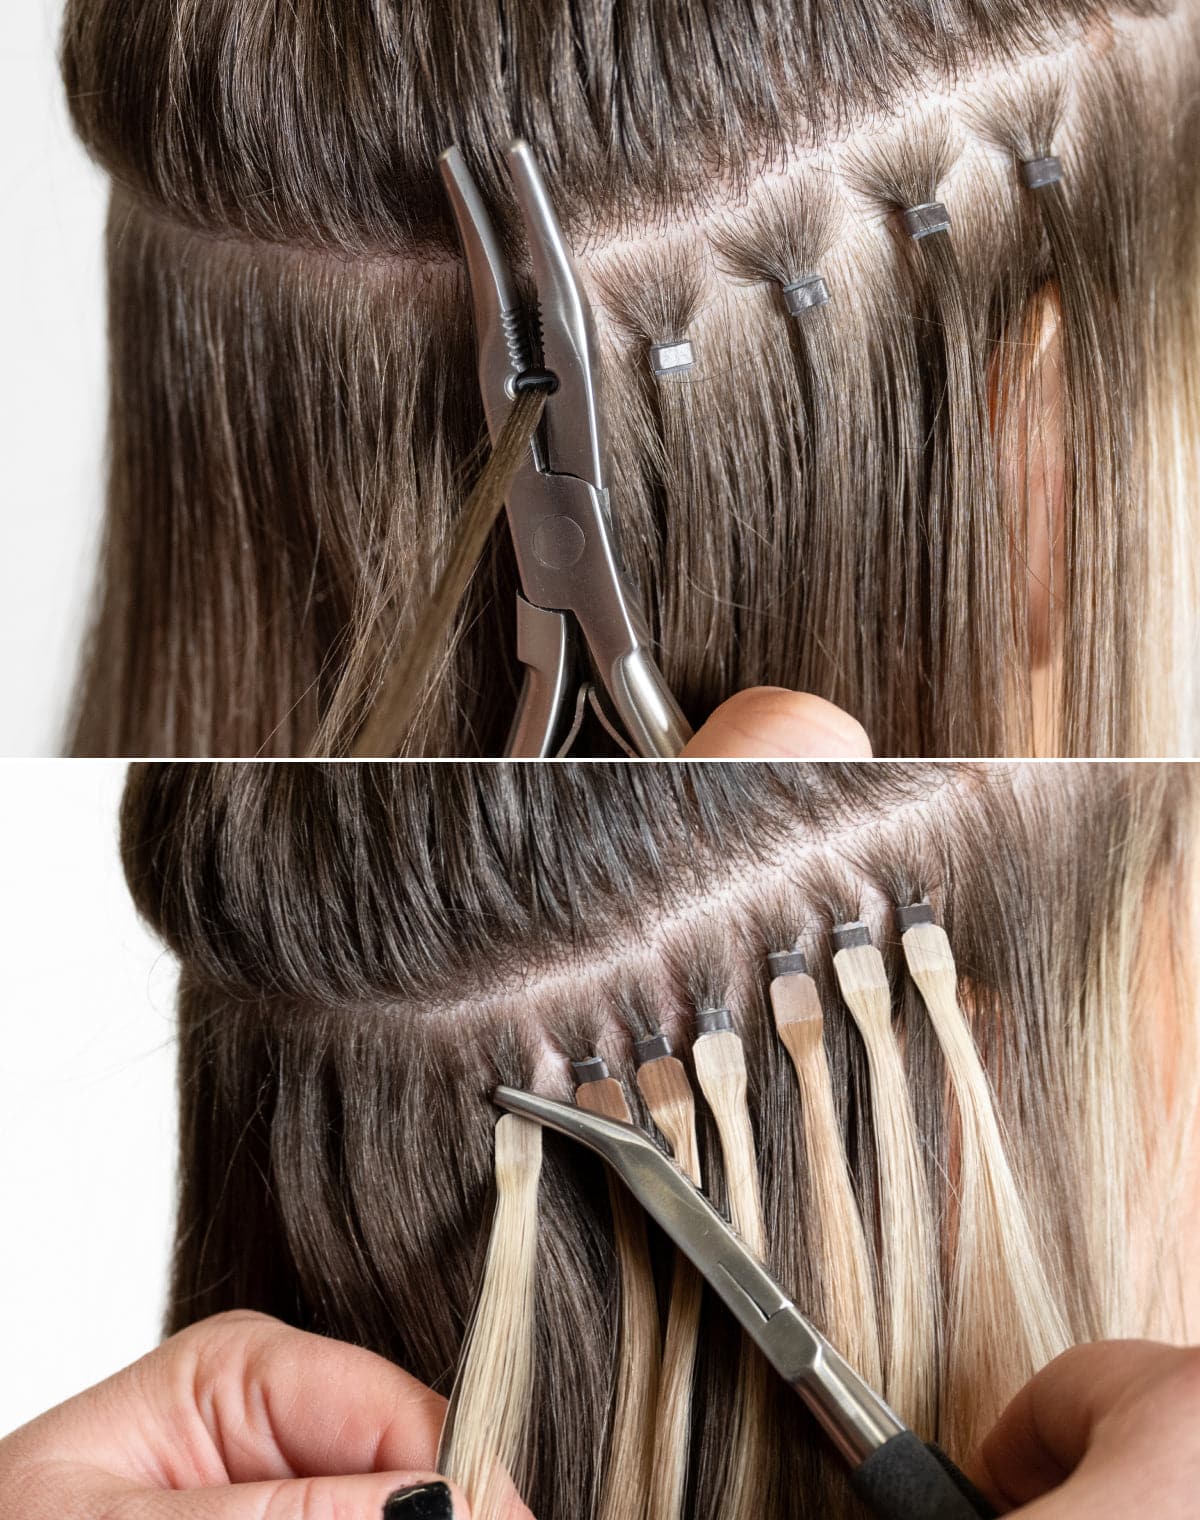 Hair Extension Tools Every Stylist Should Have In Their Kit - Donna Bella  Hair